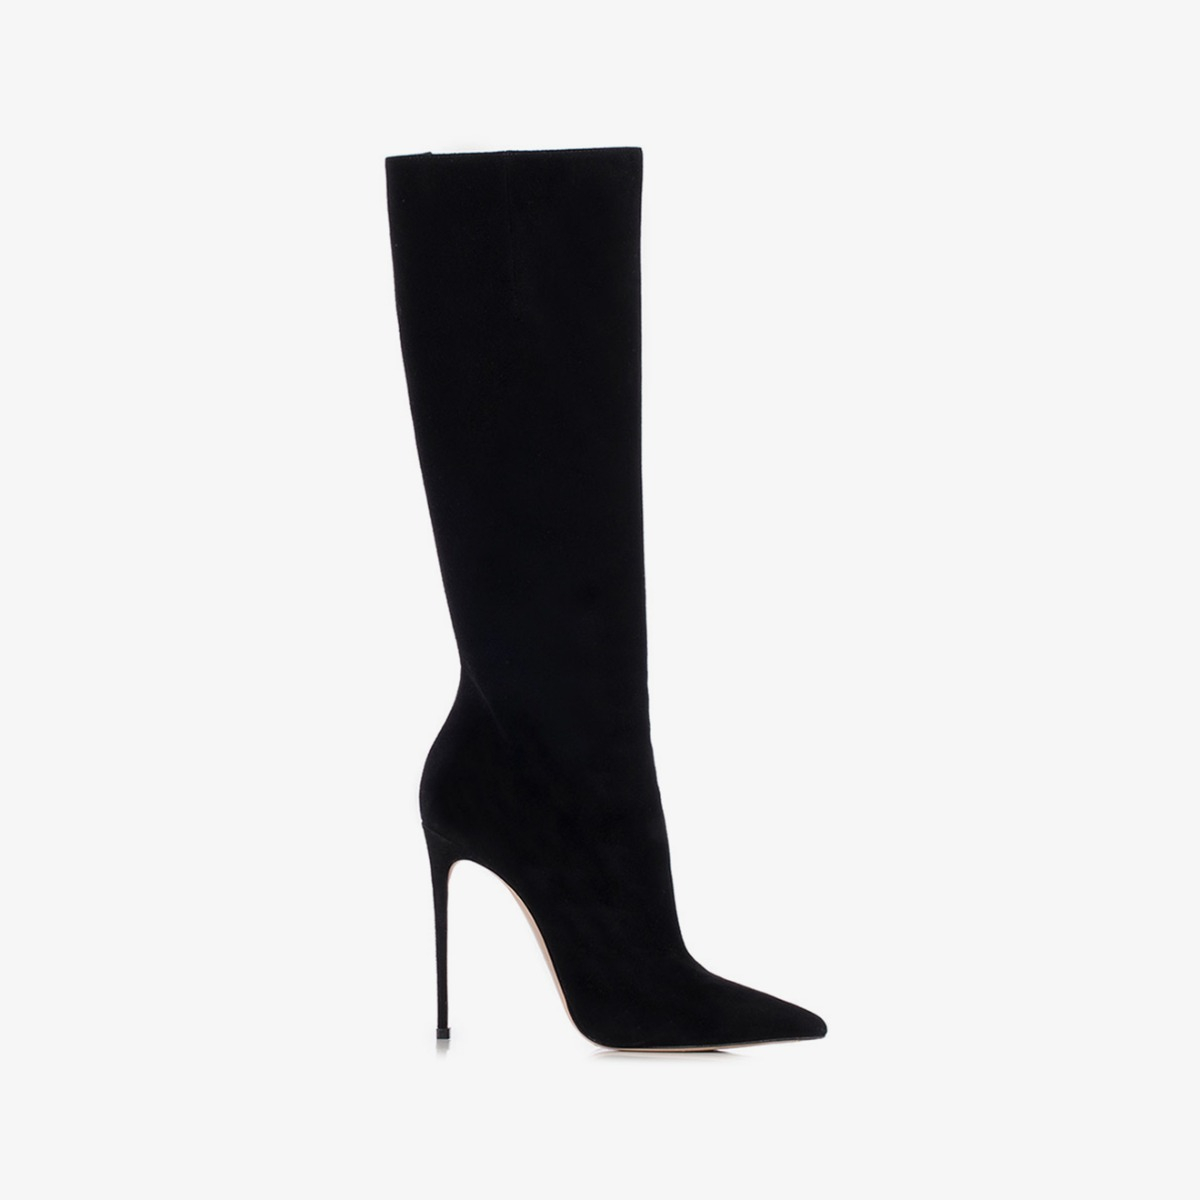 EVA BOOT 120 mm - Le Silla official outlet